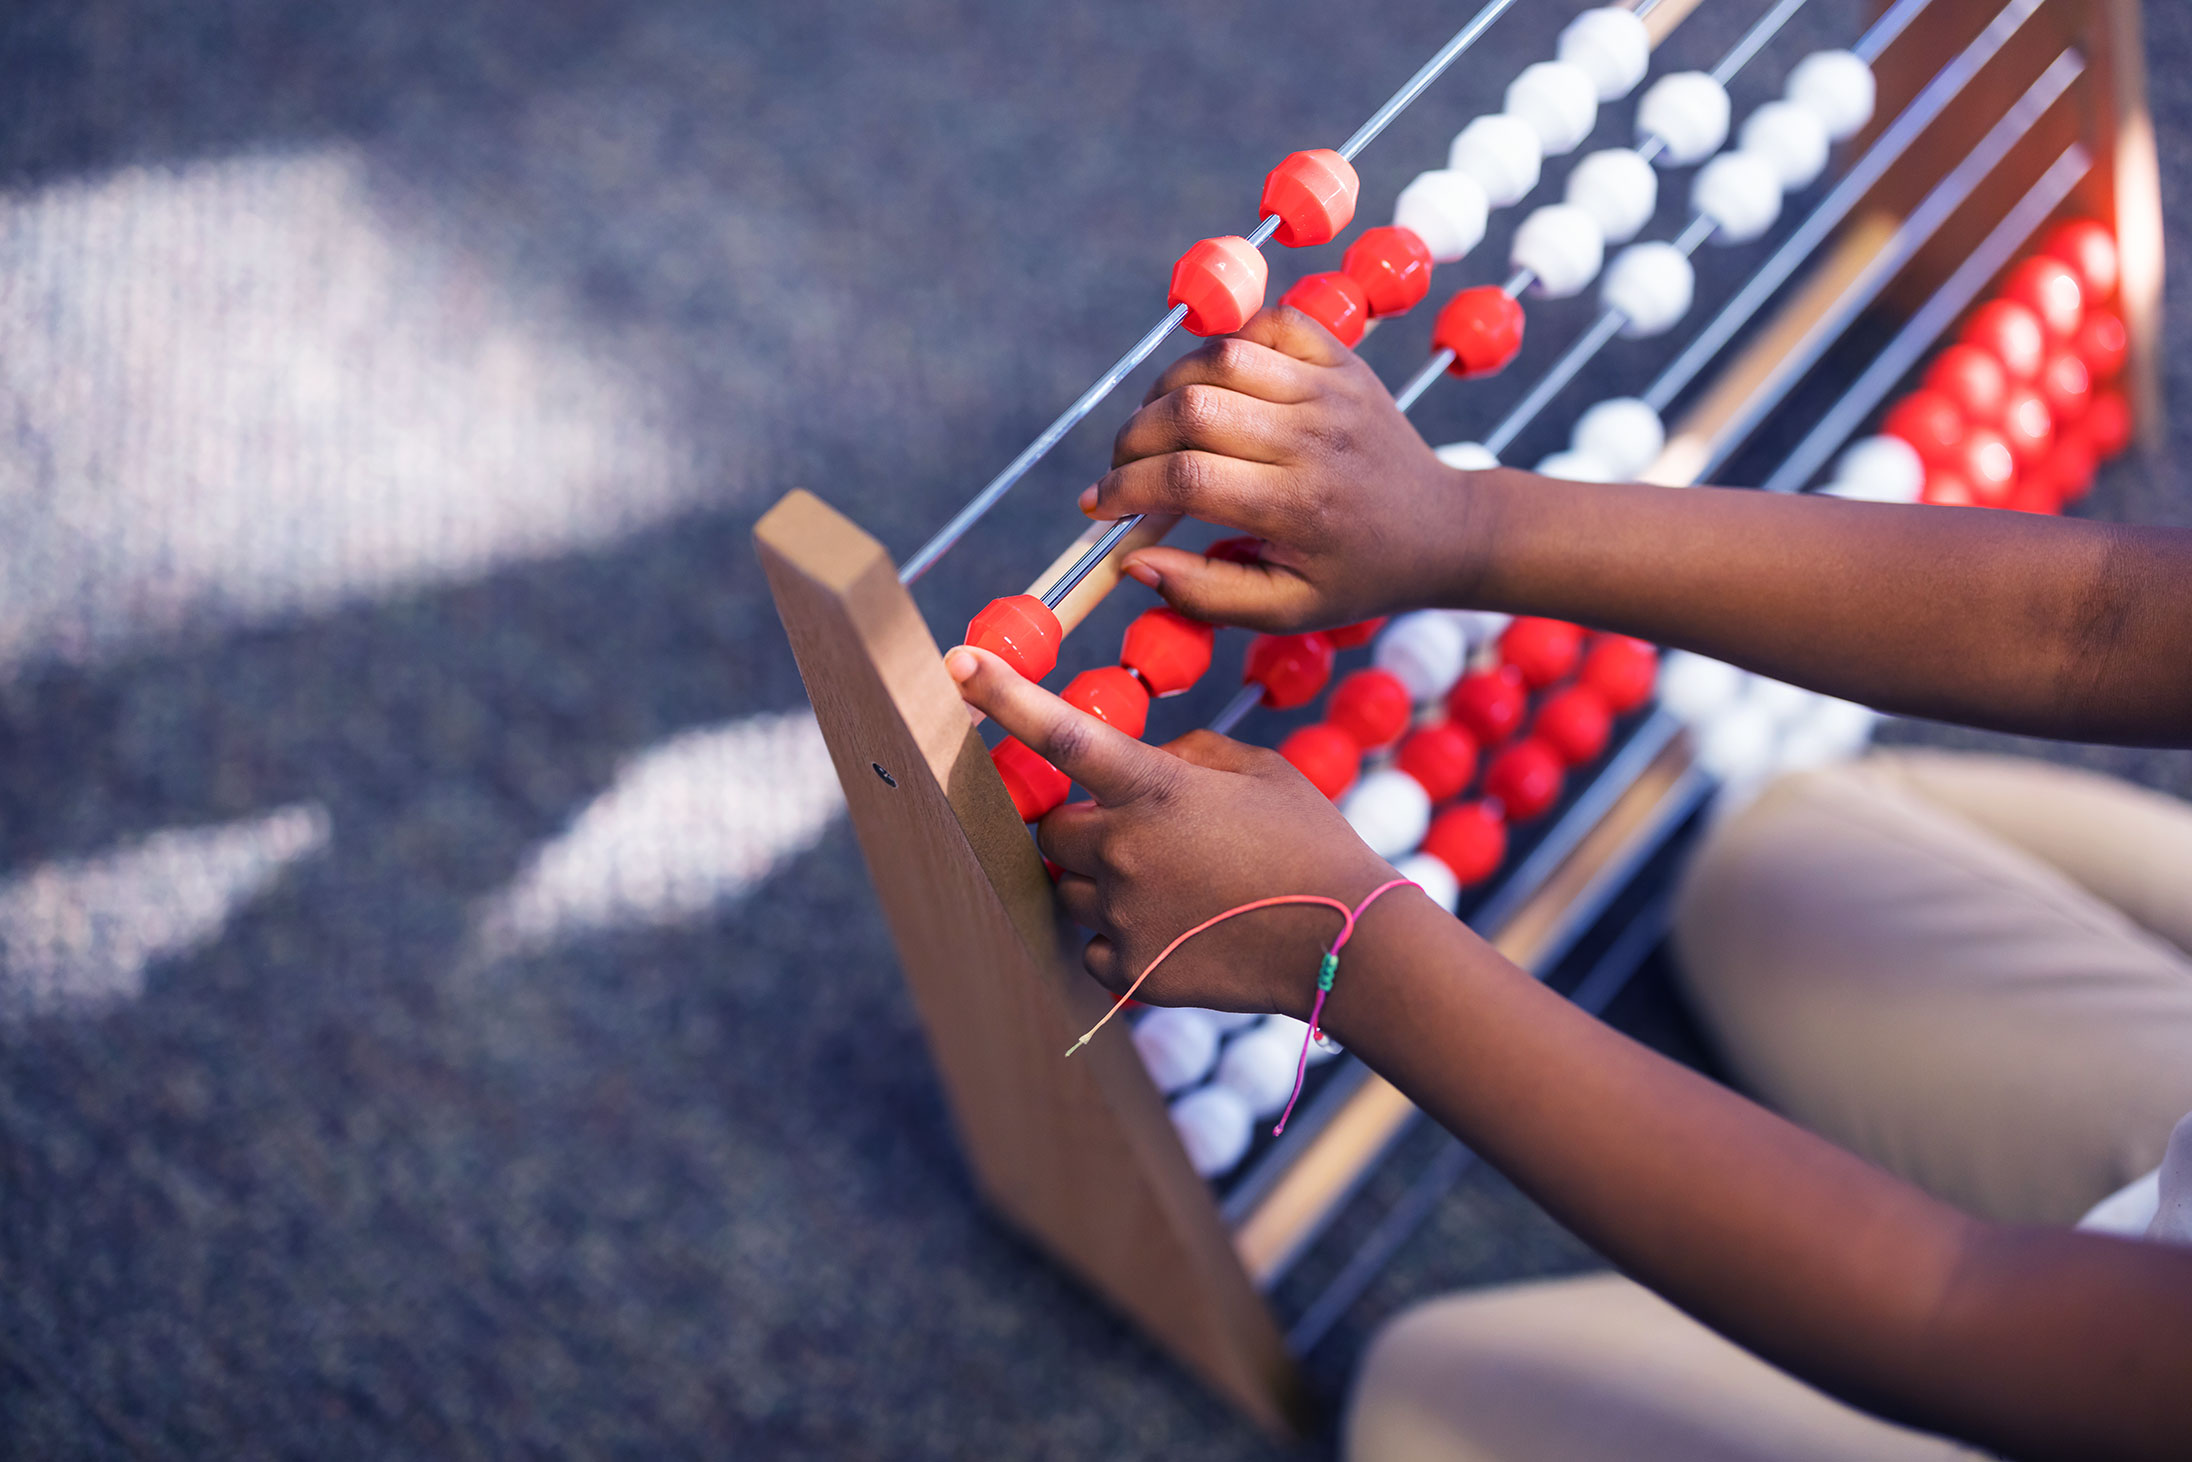 Closeup of student's hands using an abacus in the classroom.